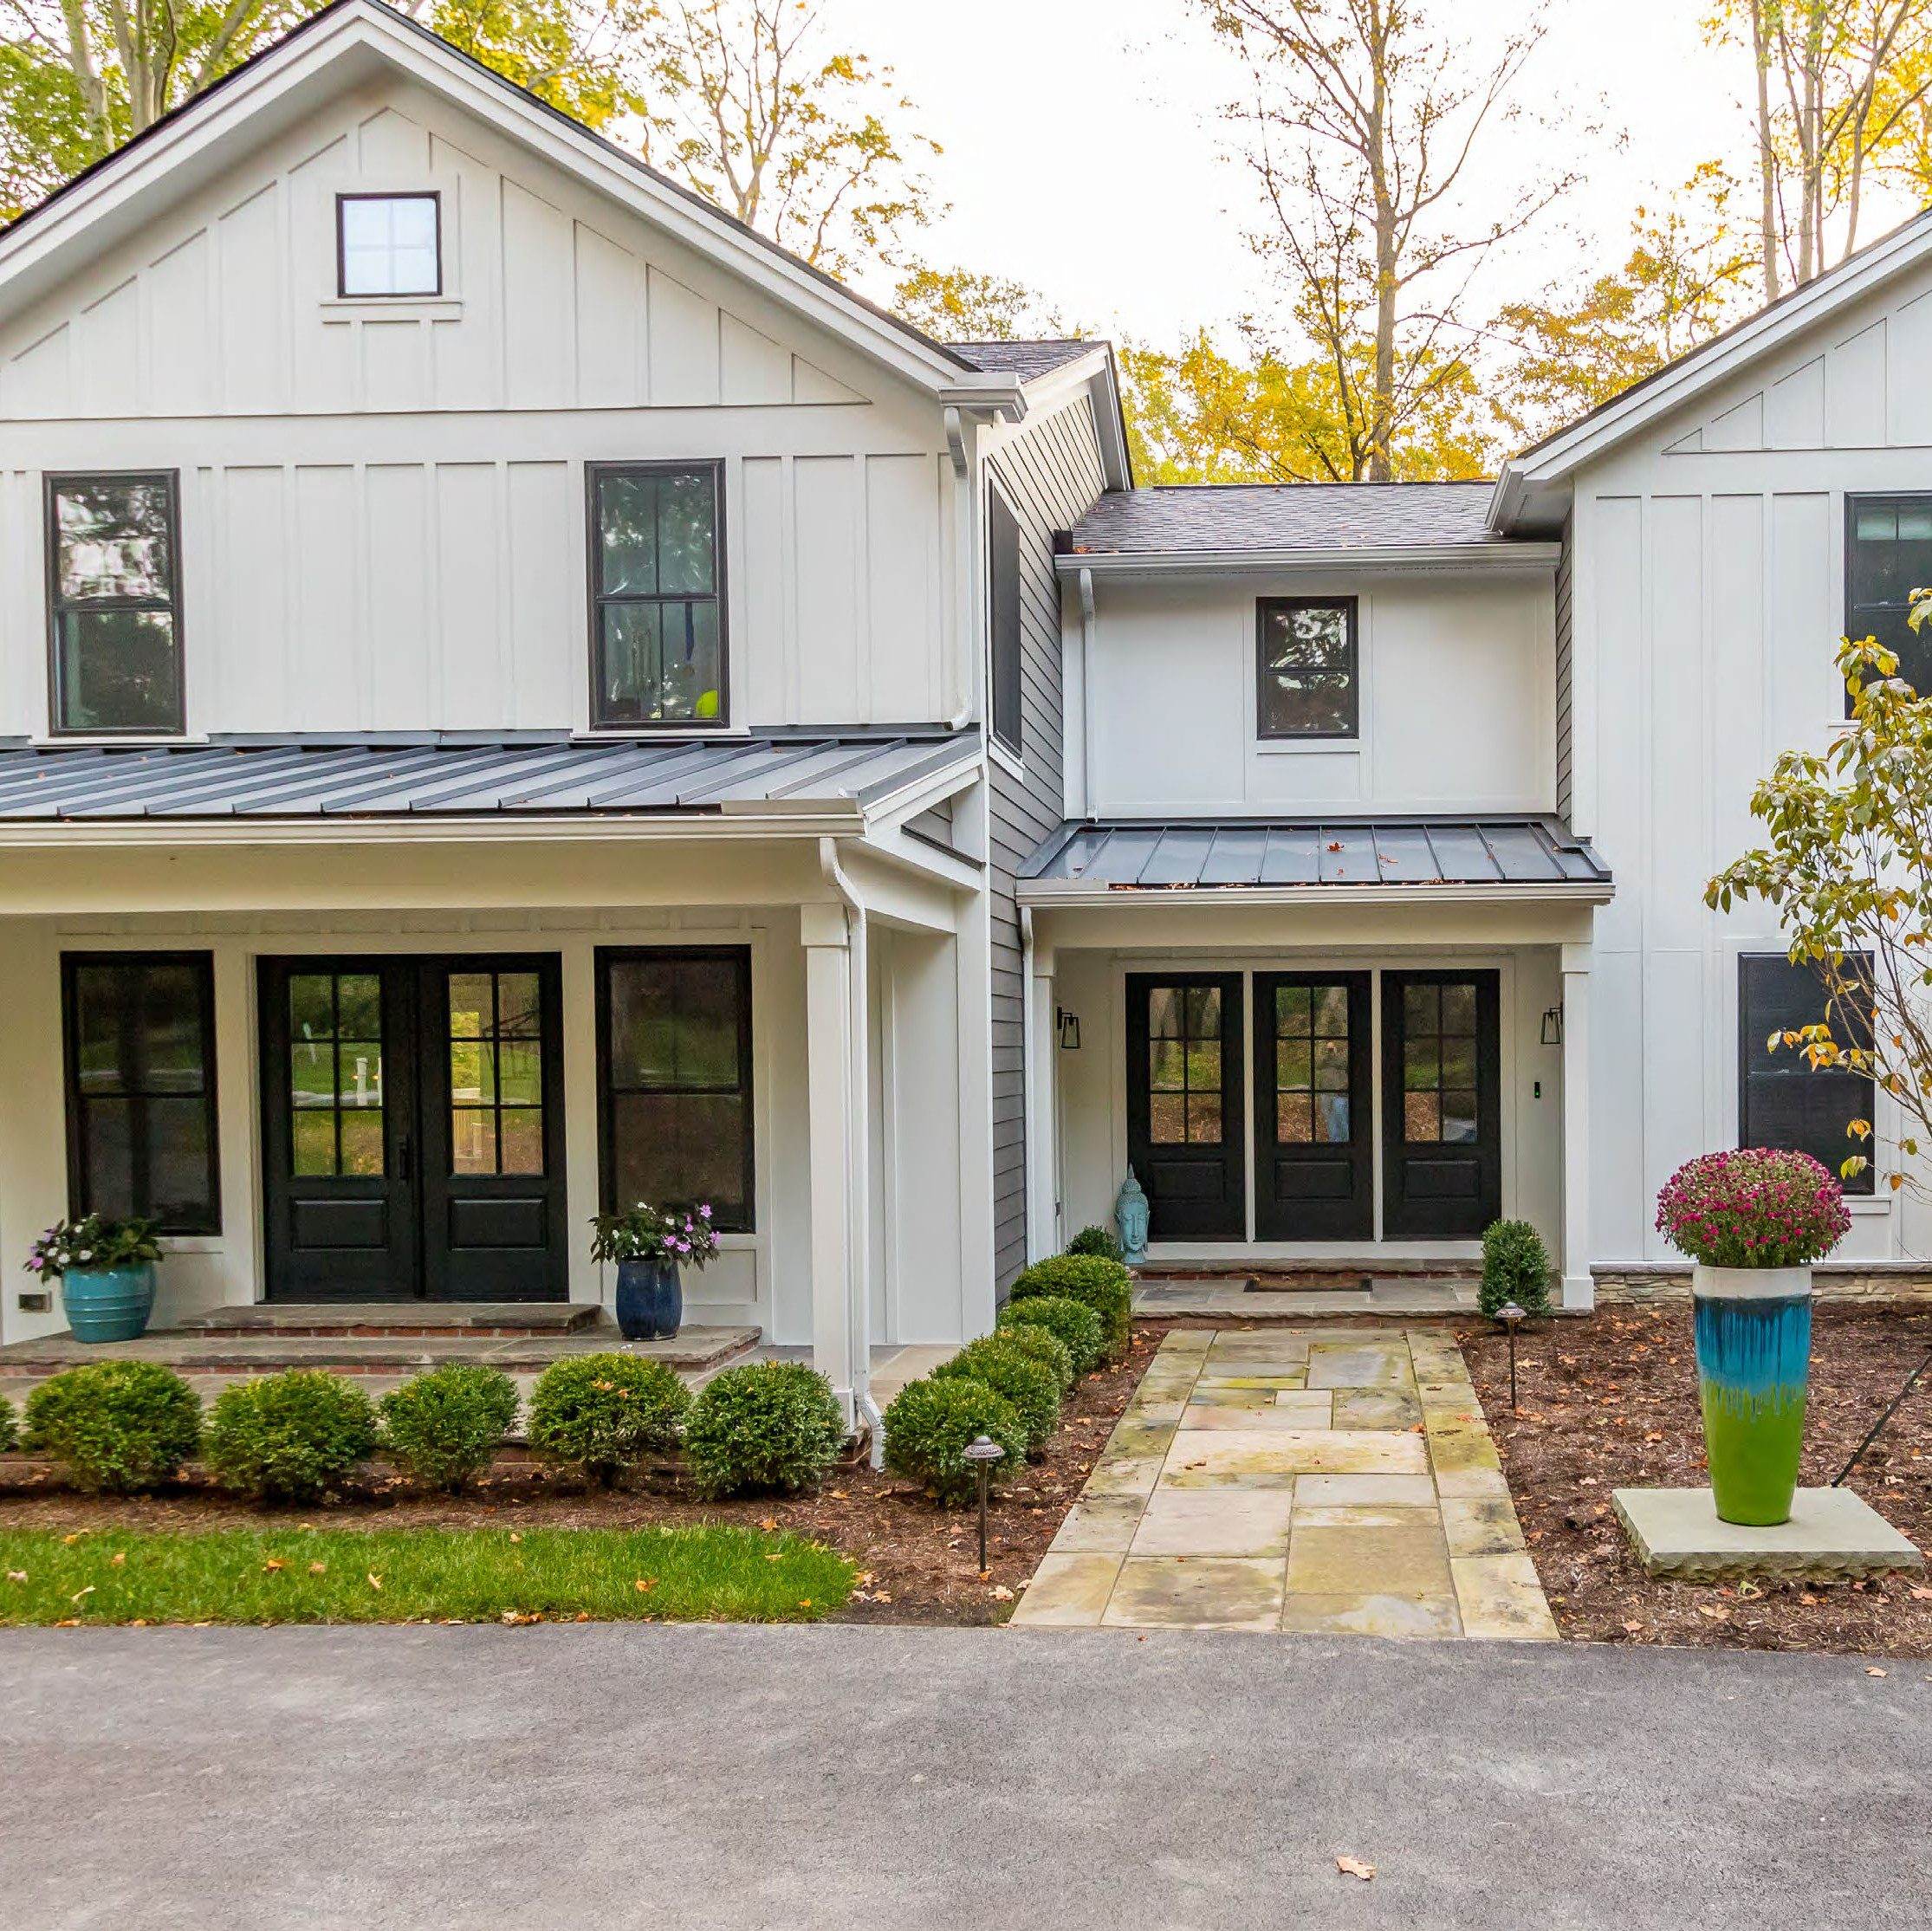 2019 OHIO HBA BEST ENTIRE HOME RENOVATION OVER $500,000